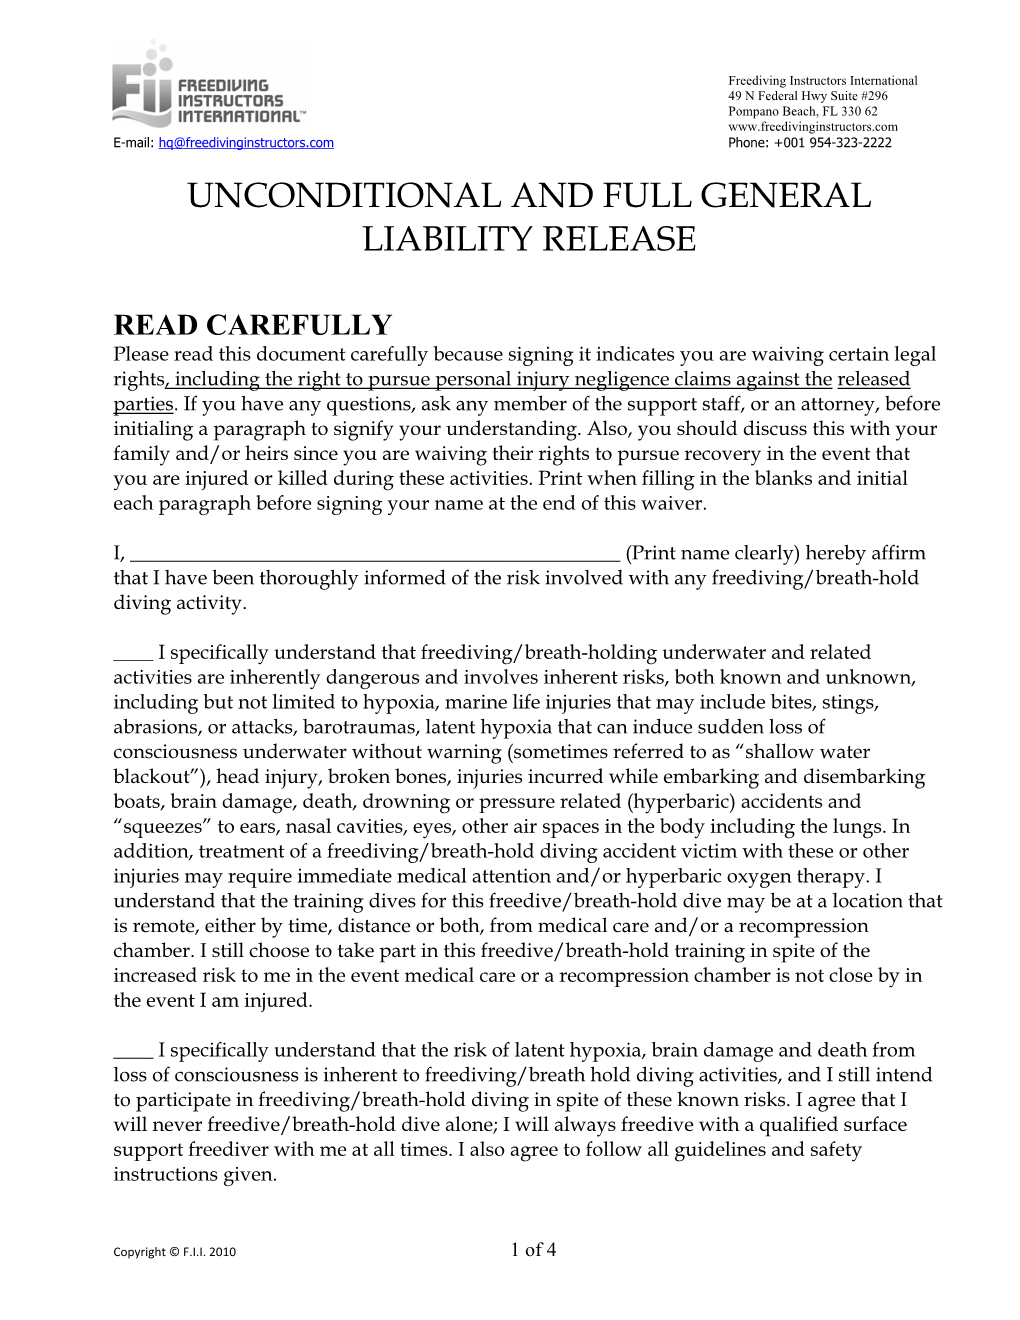 Unconditional and Full General Liability Release